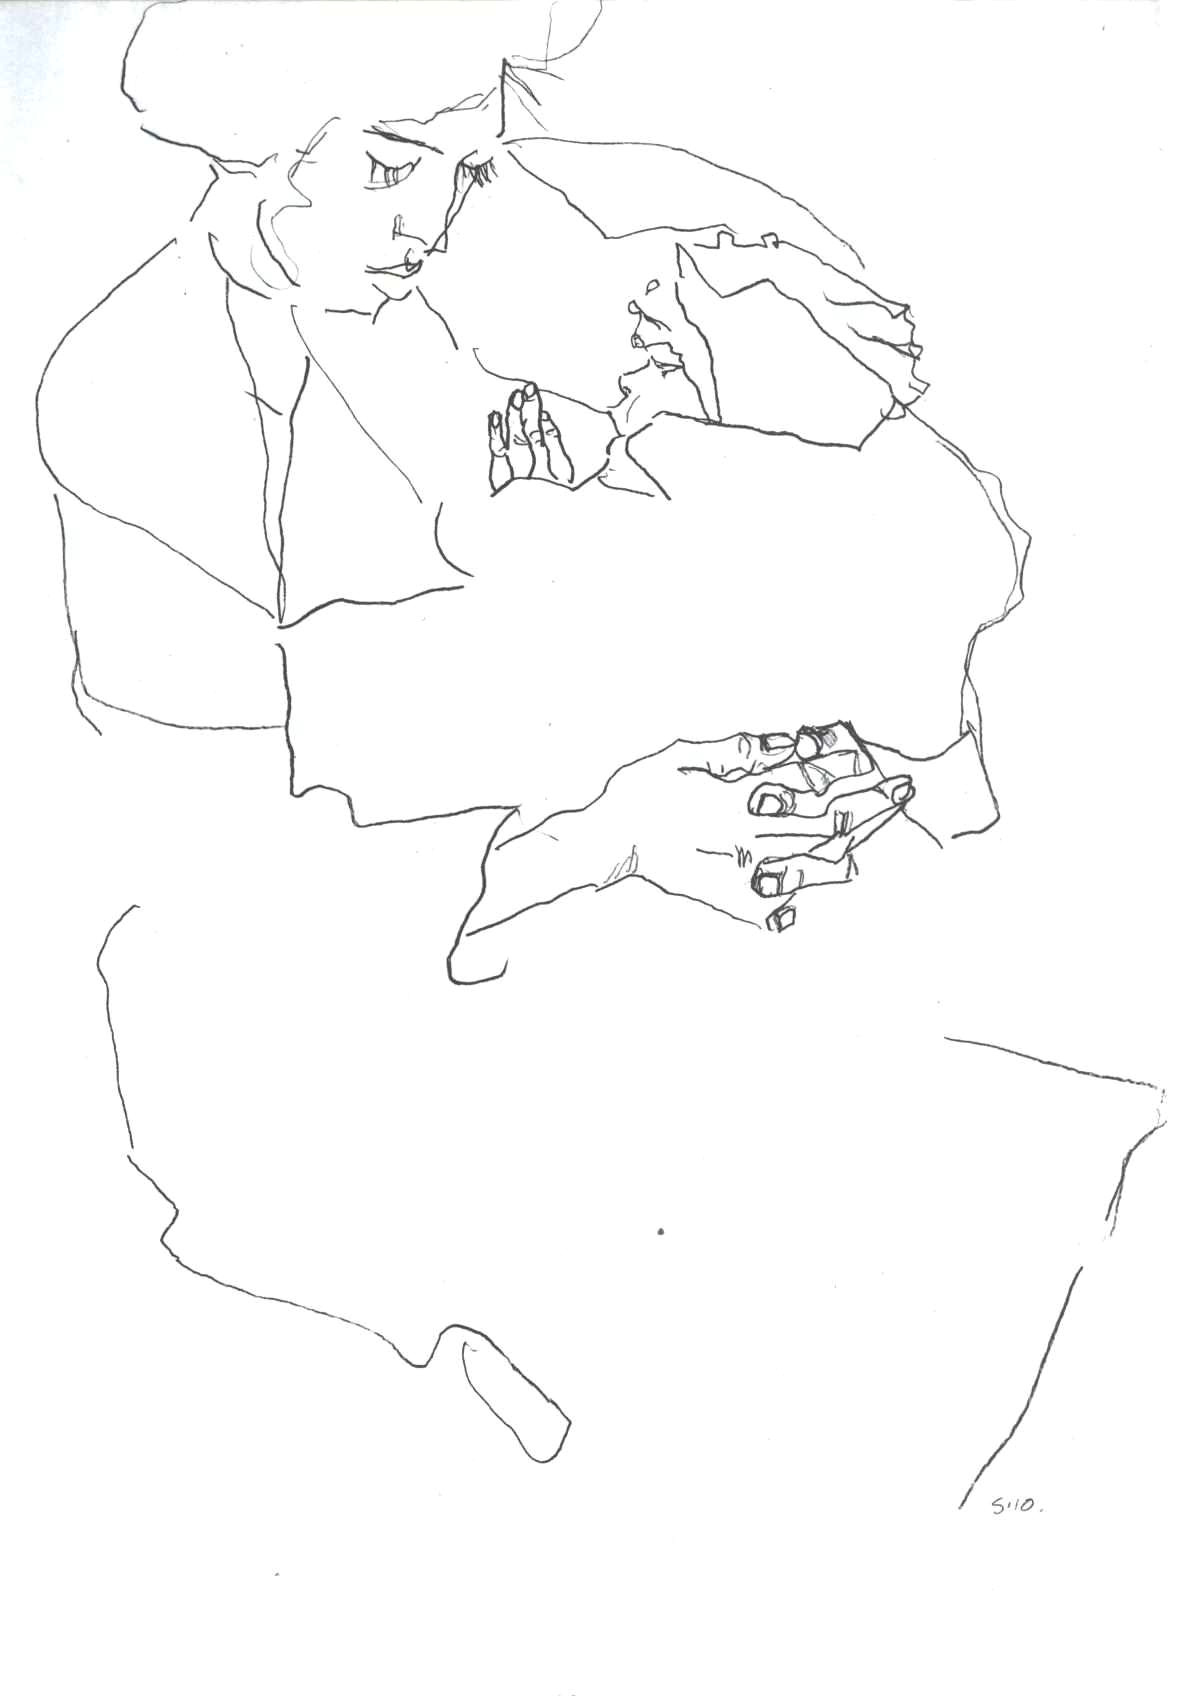 Simple Line Drawings Of Hands Contour Drawing Wikipedia